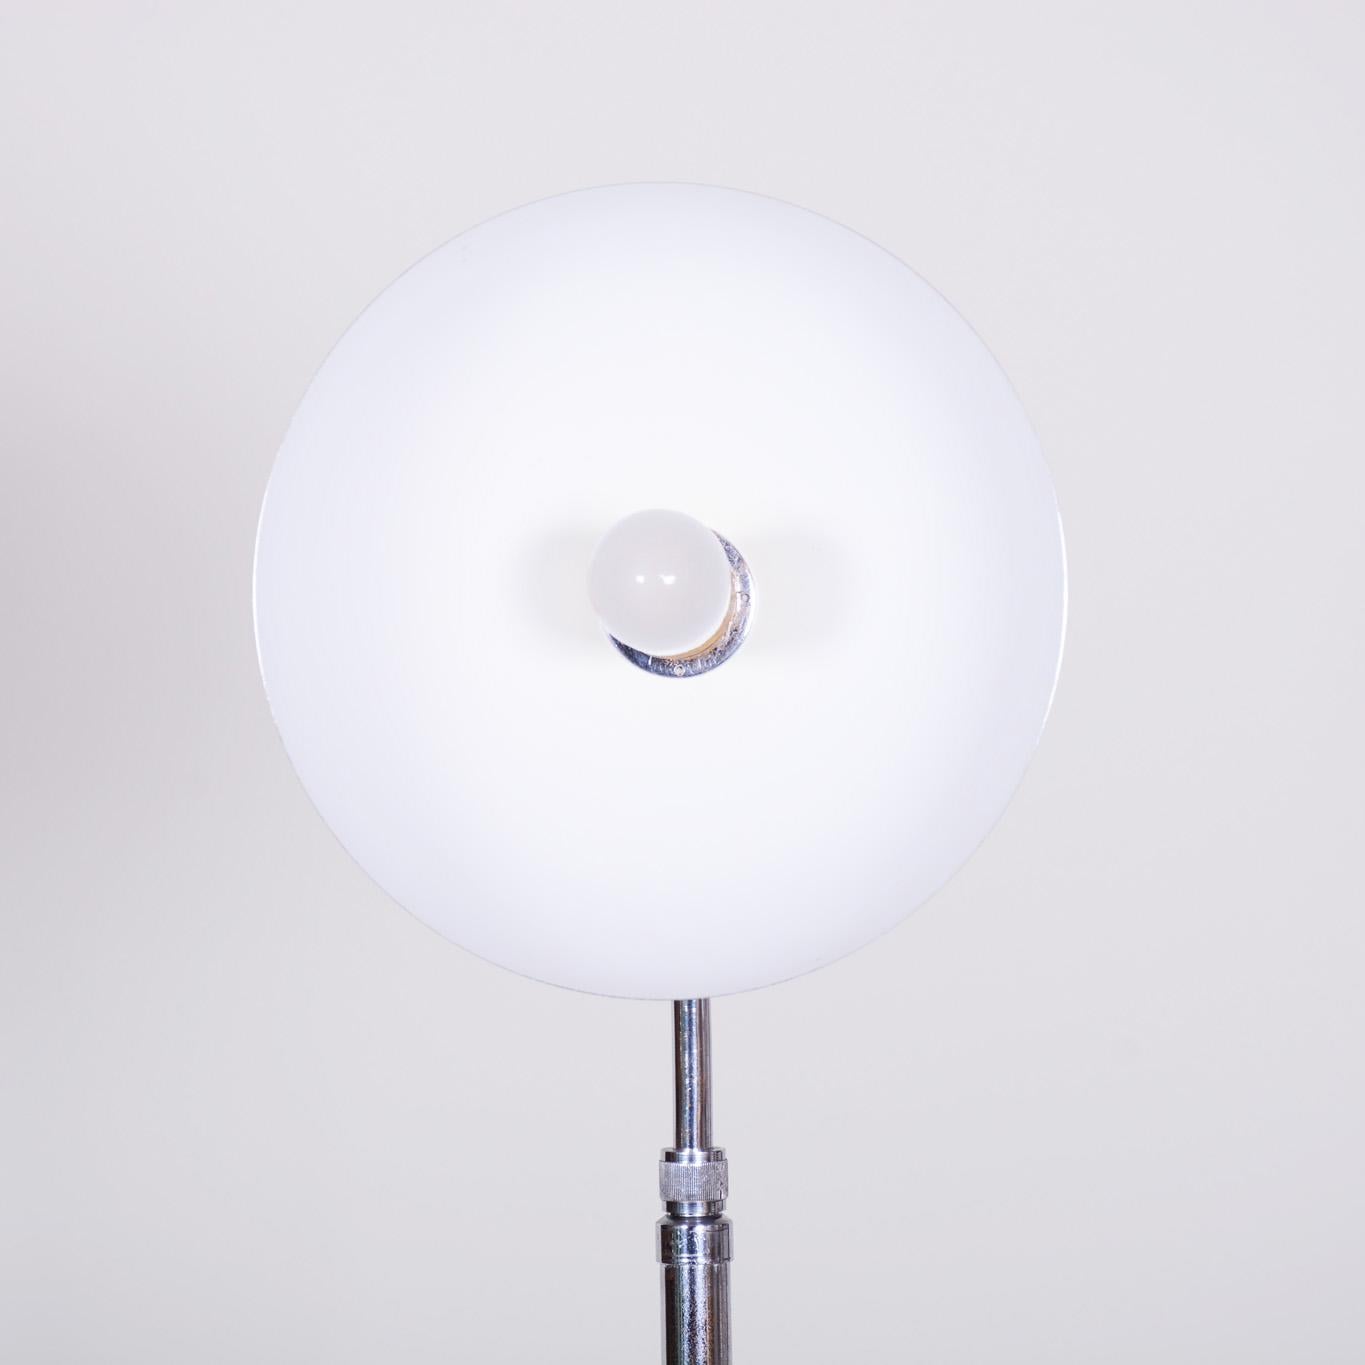 Restored Bauhaus Floor Lamp Made in the 1930s, Made Out of Chrome Plated Steel For Sale 3